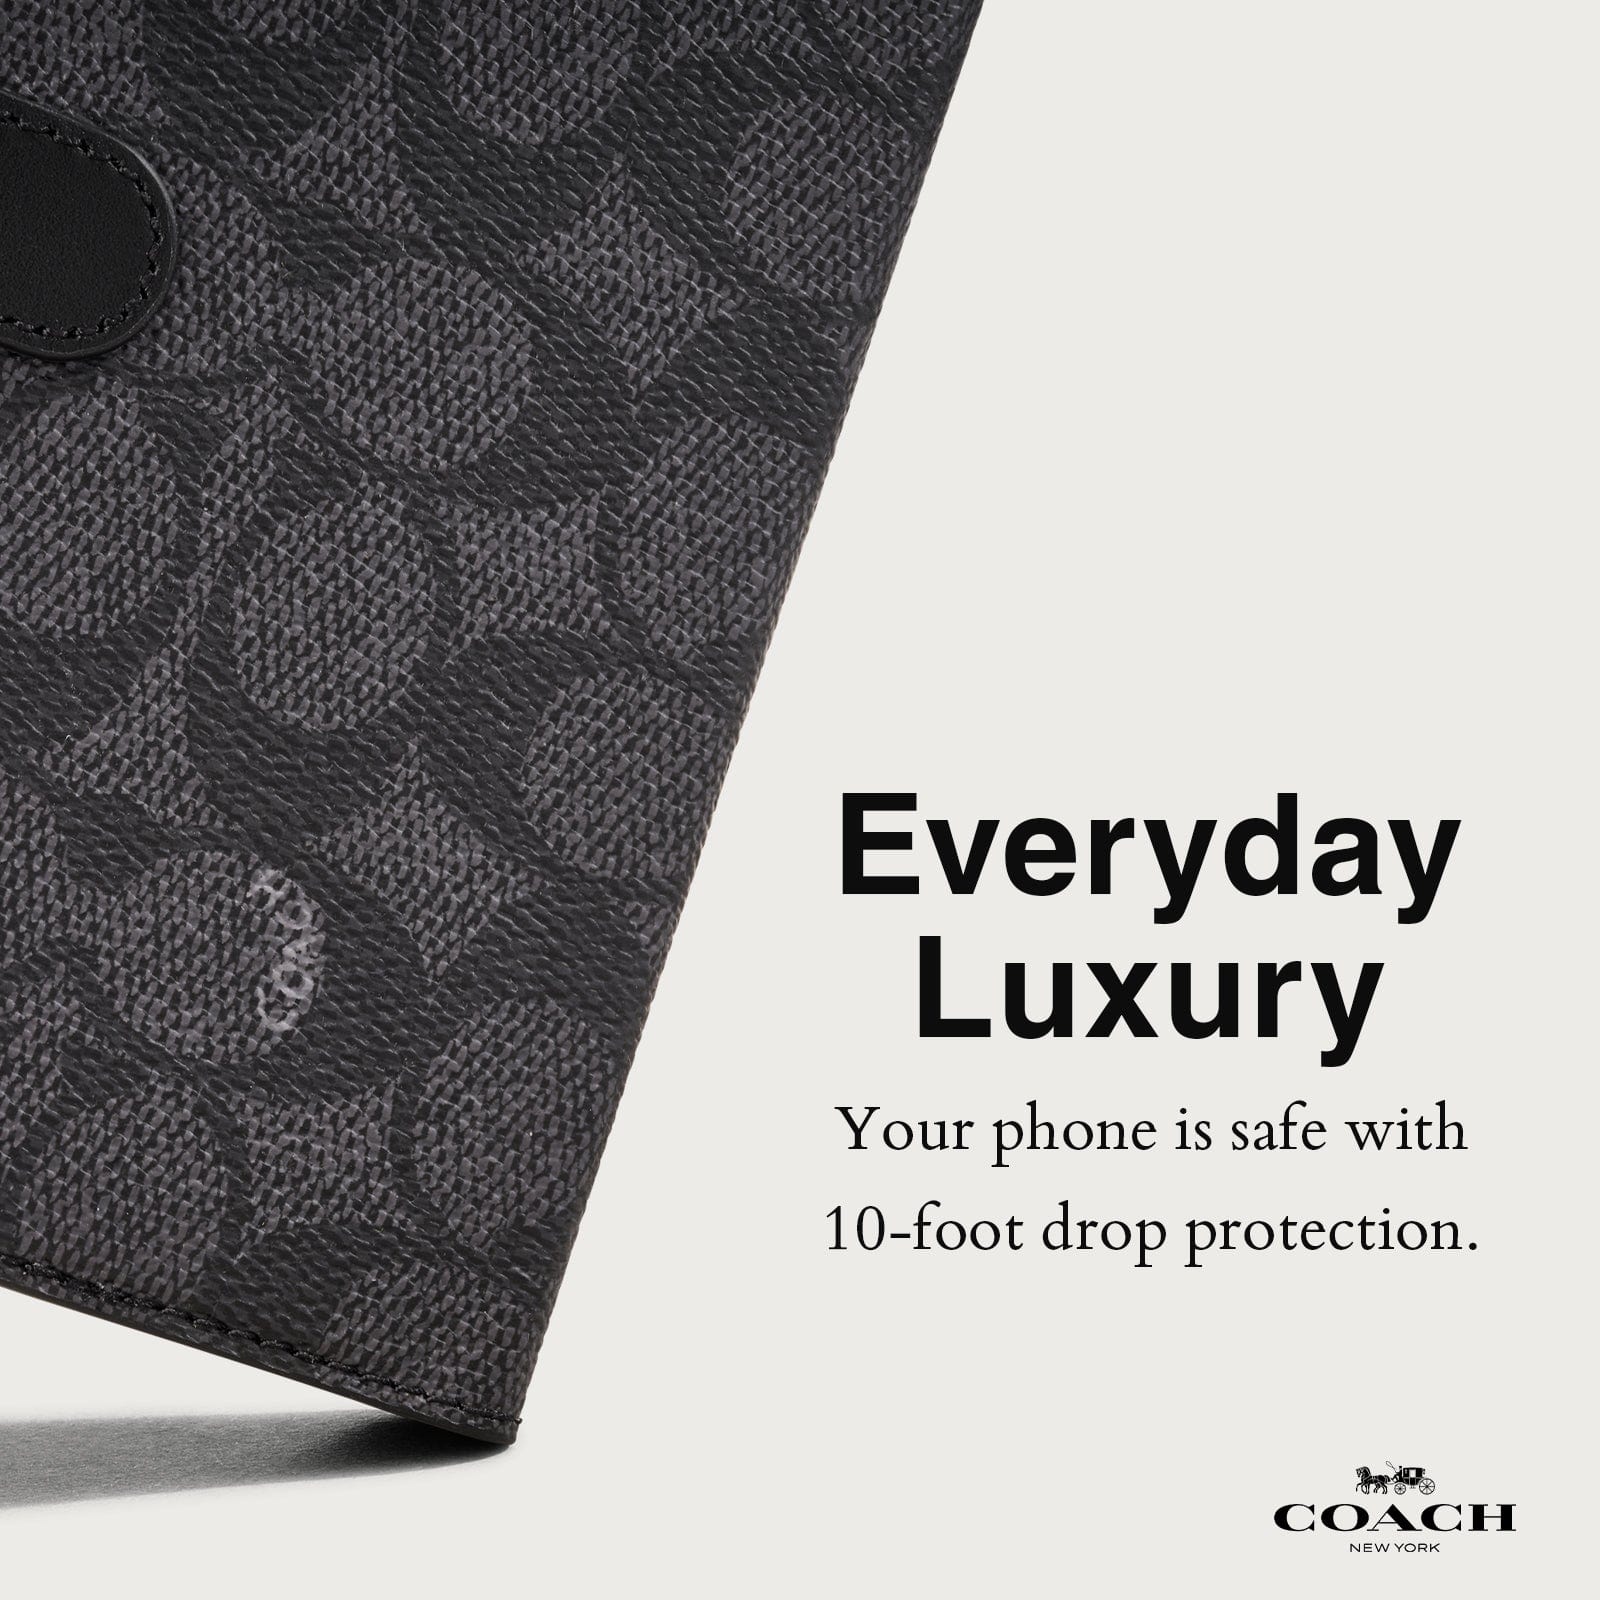 EVERYDAY LUXURY. YOUR PHONE IS SAFE WITH 10-FOOT DROP PROTECTION